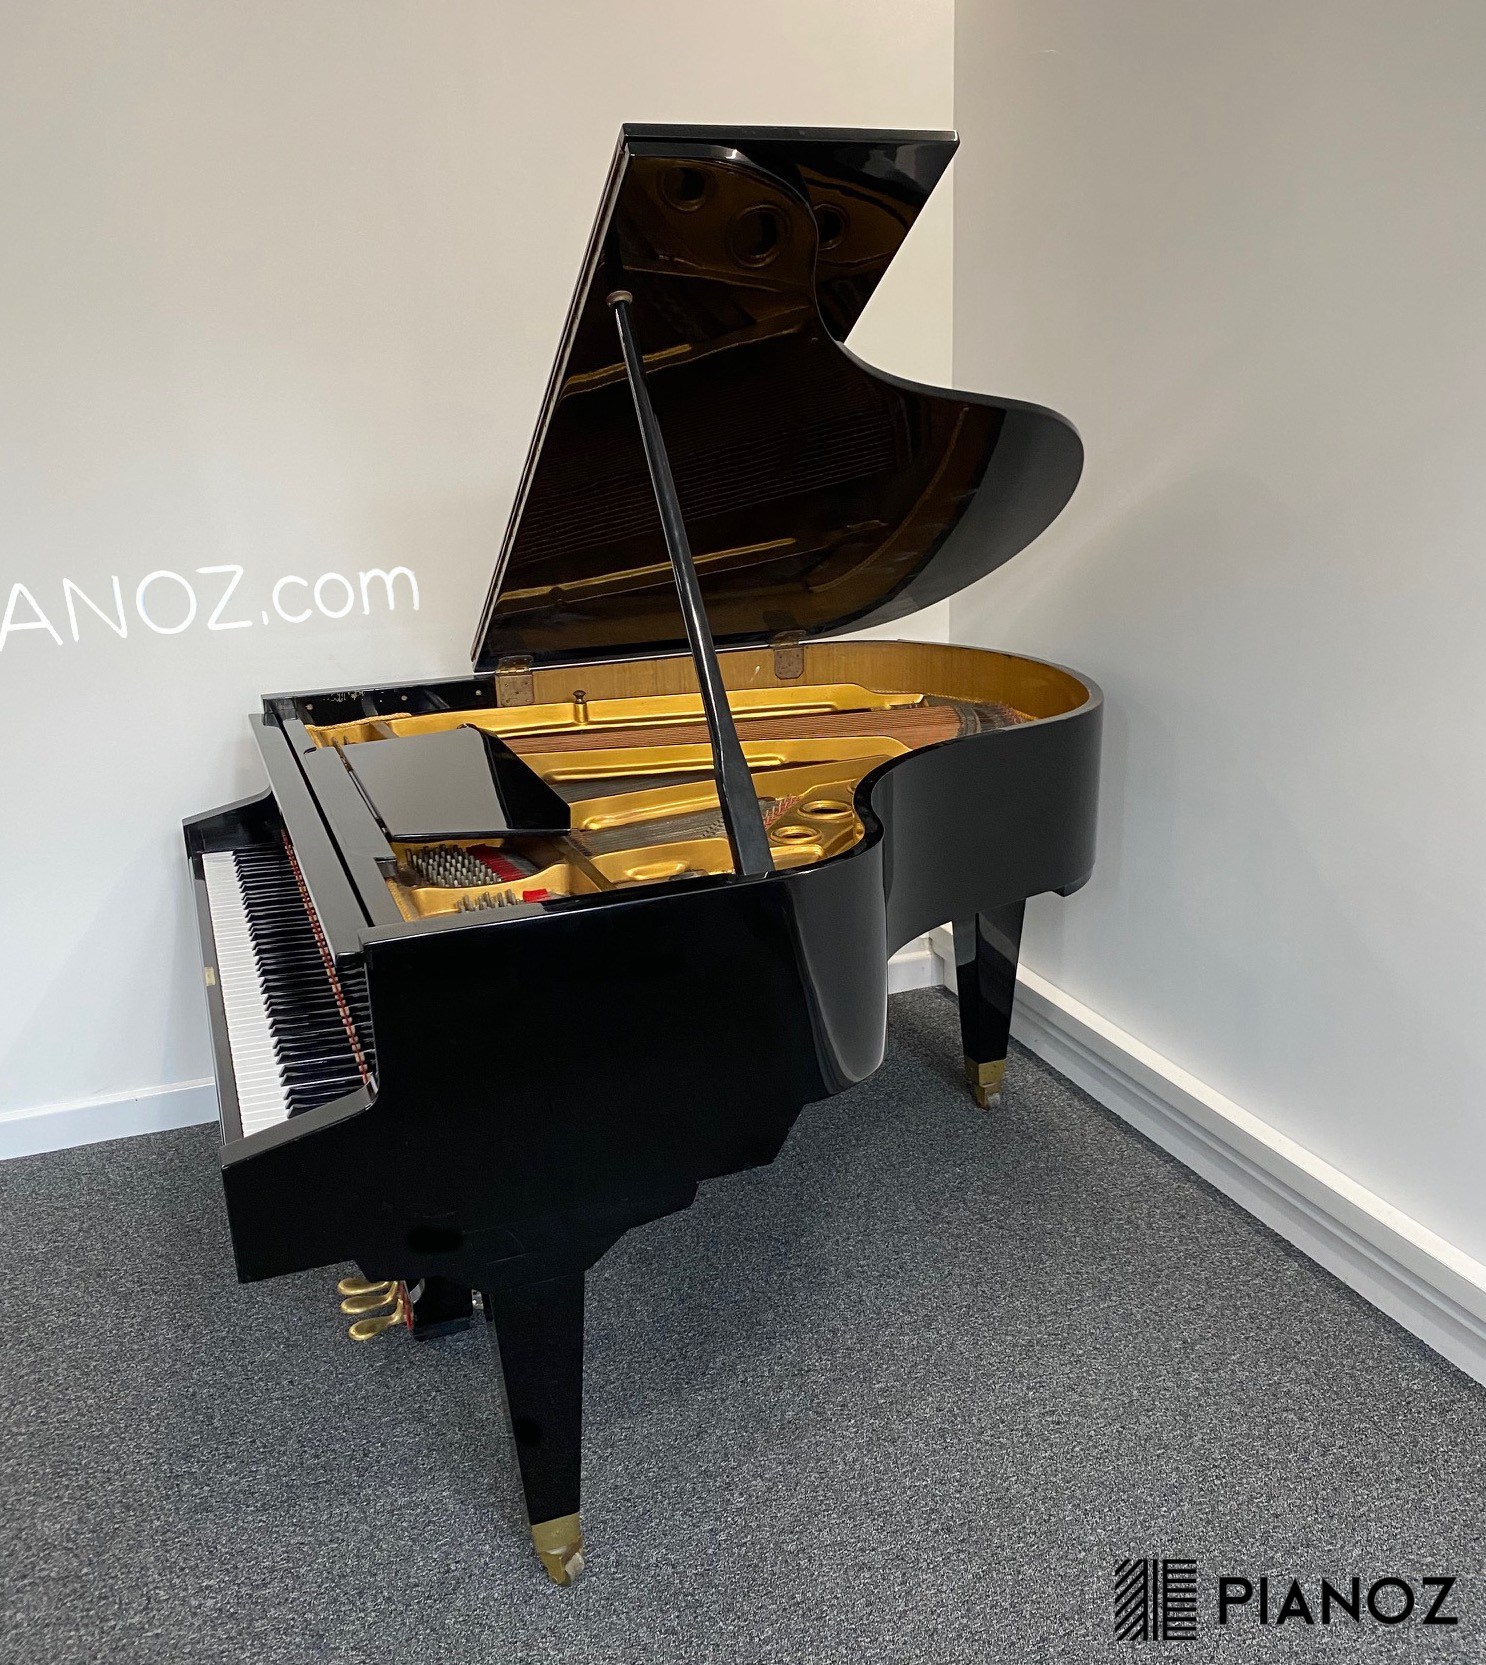 Neer Black High Gloss Baby Grand Piano piano for sale in UK